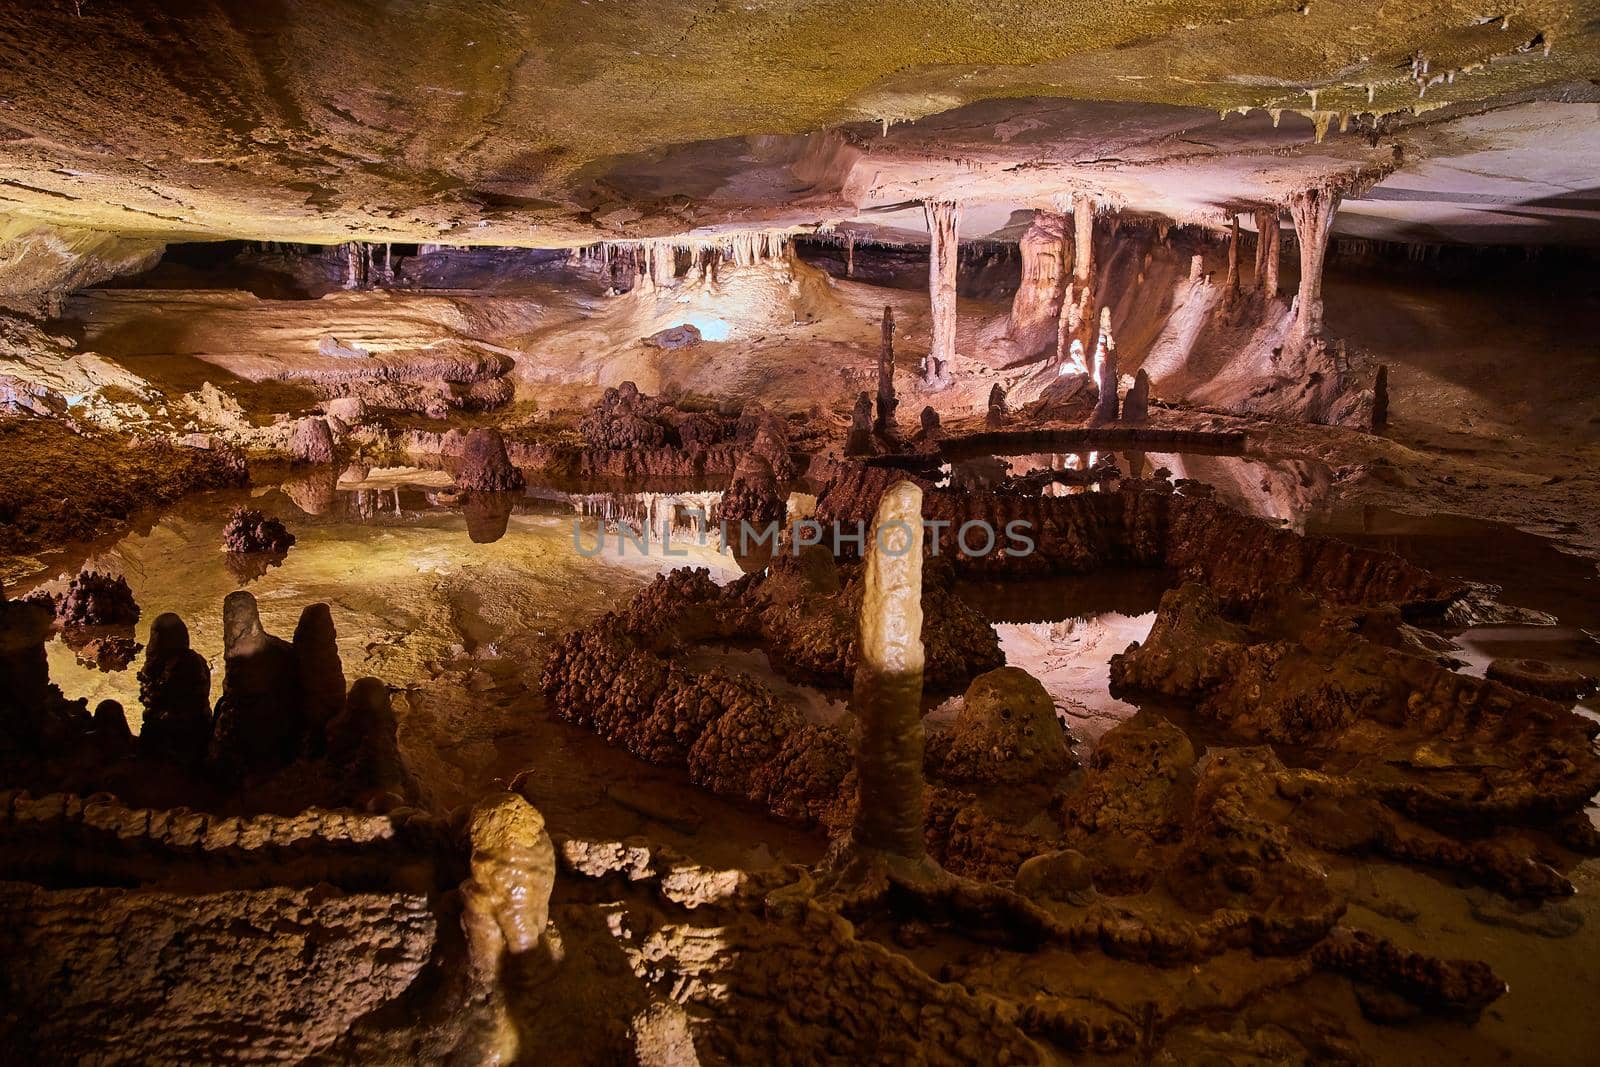 Image of View of large open cave filled with reflective waters, stalagmites and stalactites